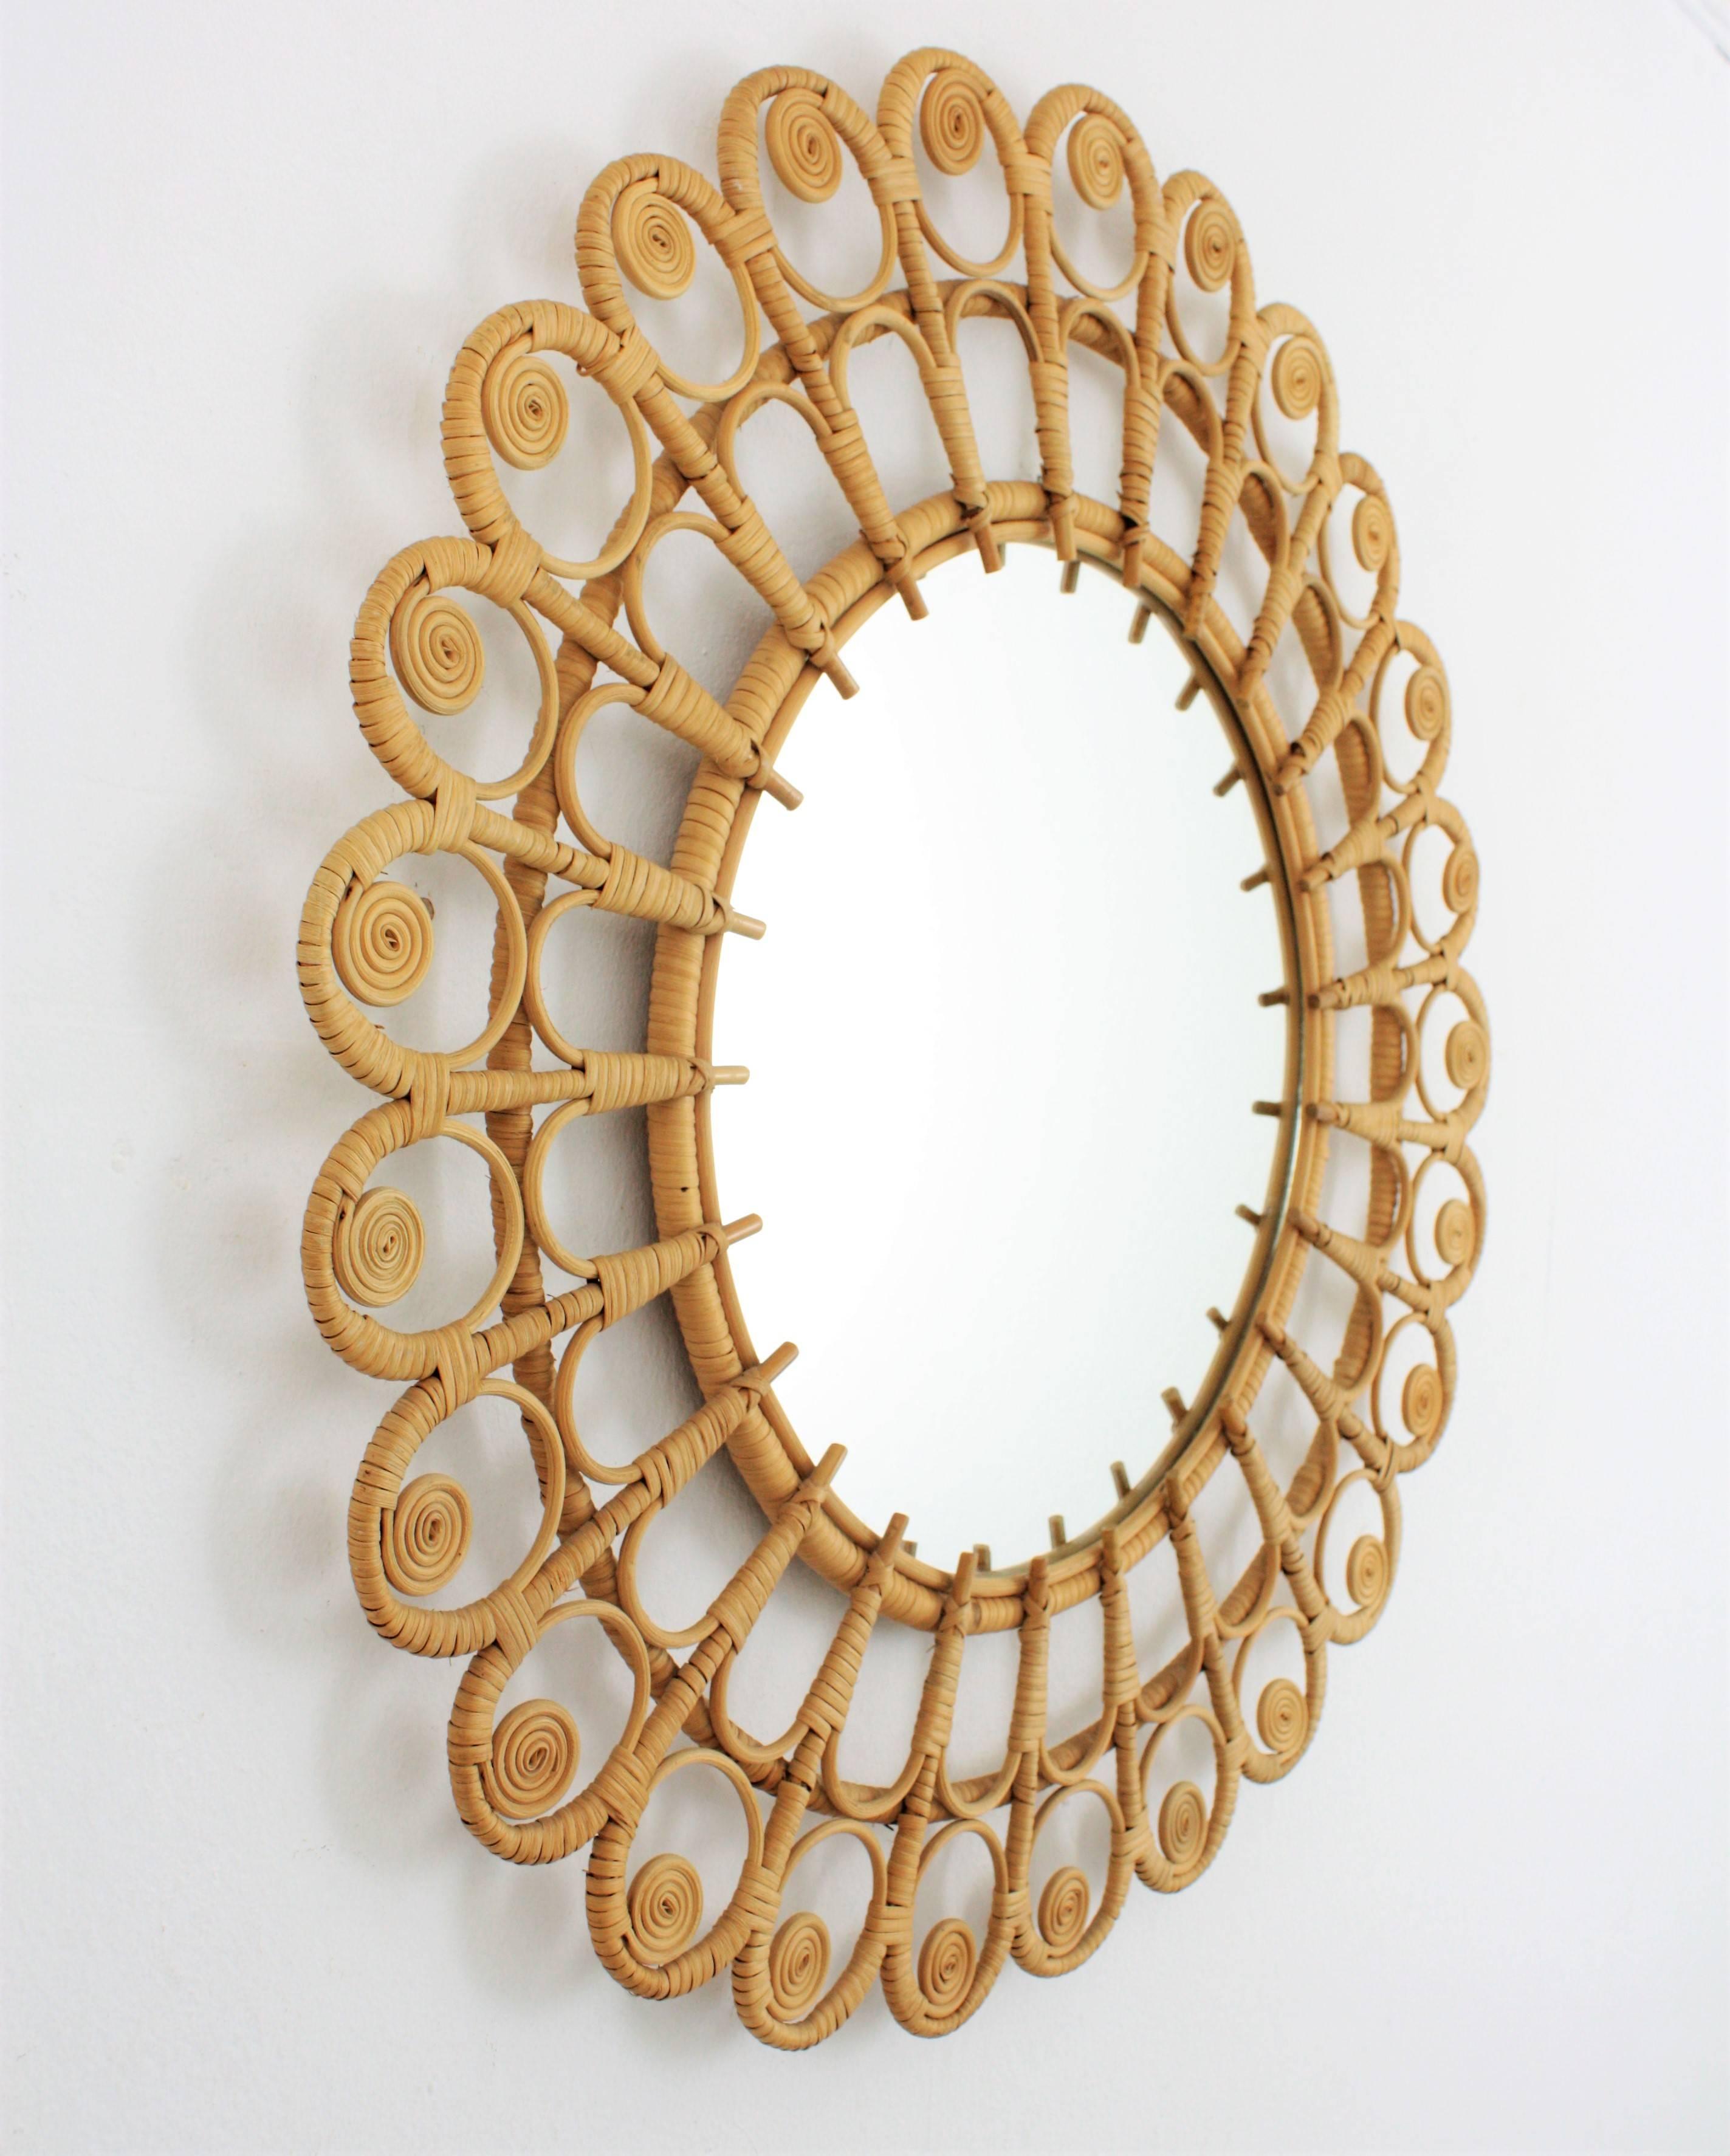 Lovely handcrafted wicker mirror with a beautiful artistic filigree frame. This mirror has all the taste of the Mediterranean and Bohemian style. Handmade in wicker and rattan with natural finish without varnish. Beautiful placing it alone or placed